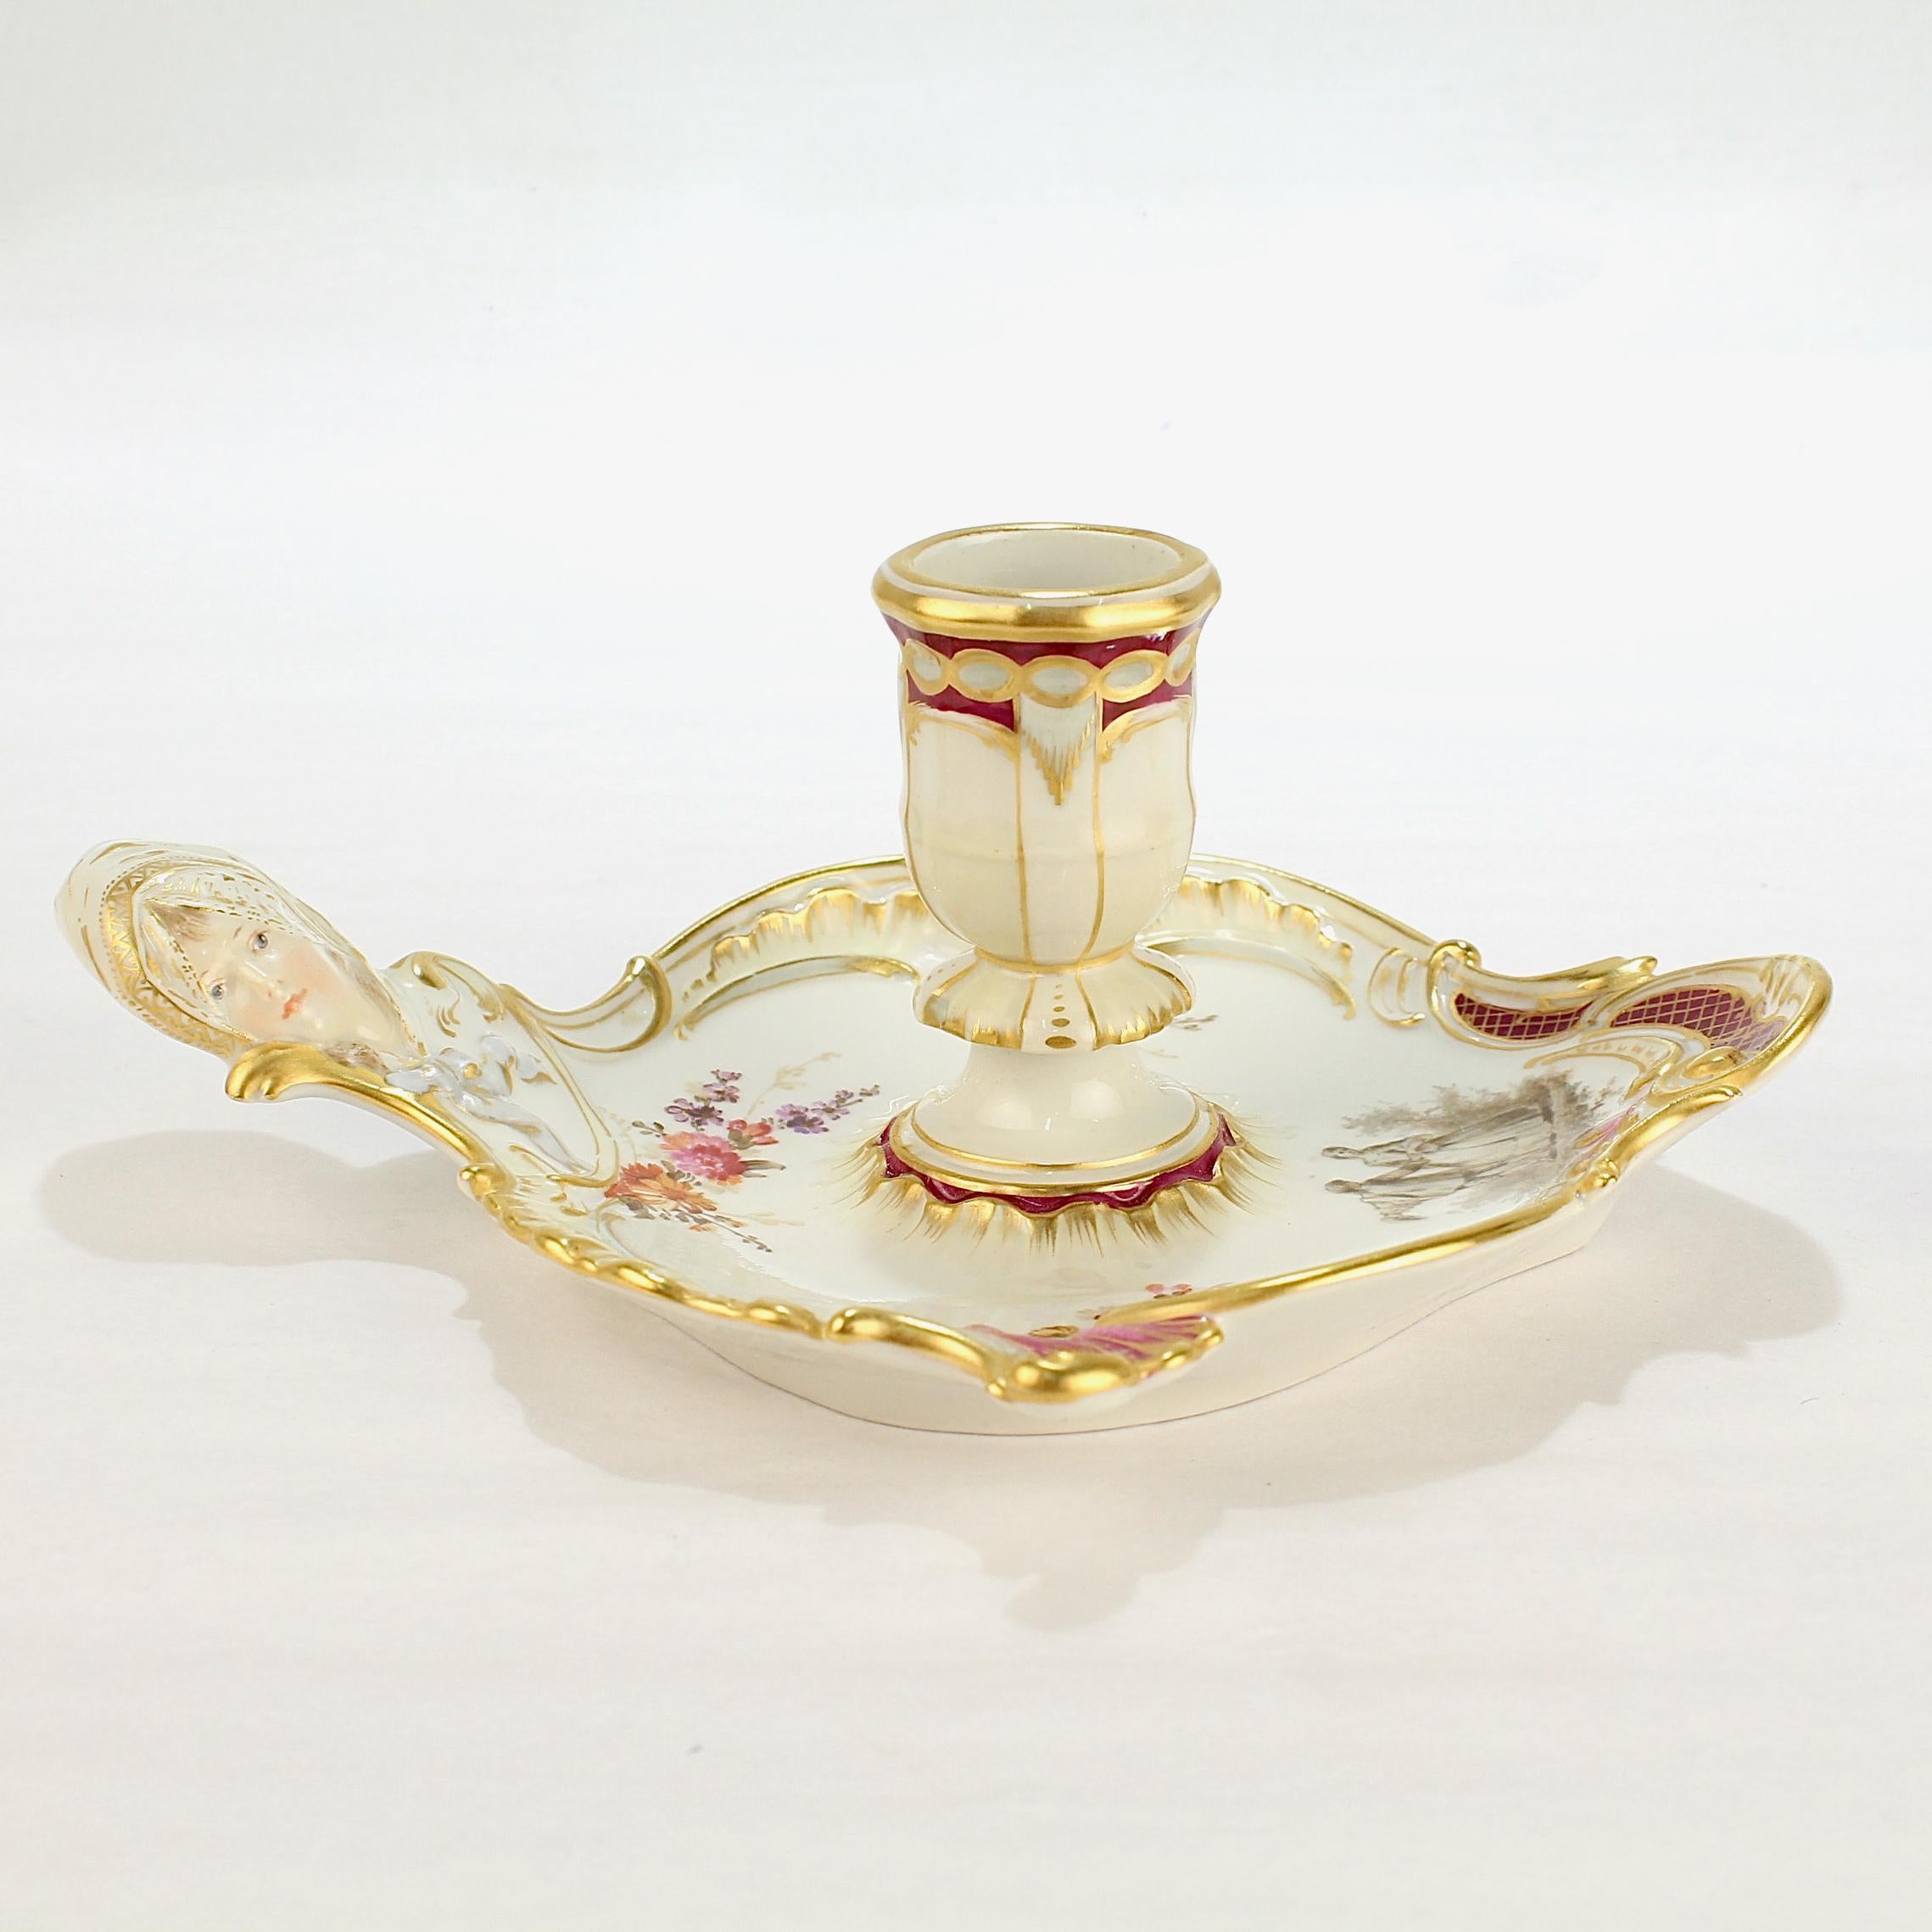 Antique KPM Royal Berlin Porcelain Chamberstick with a Maiden's Head Handle In Good Condition For Sale In Philadelphia, PA